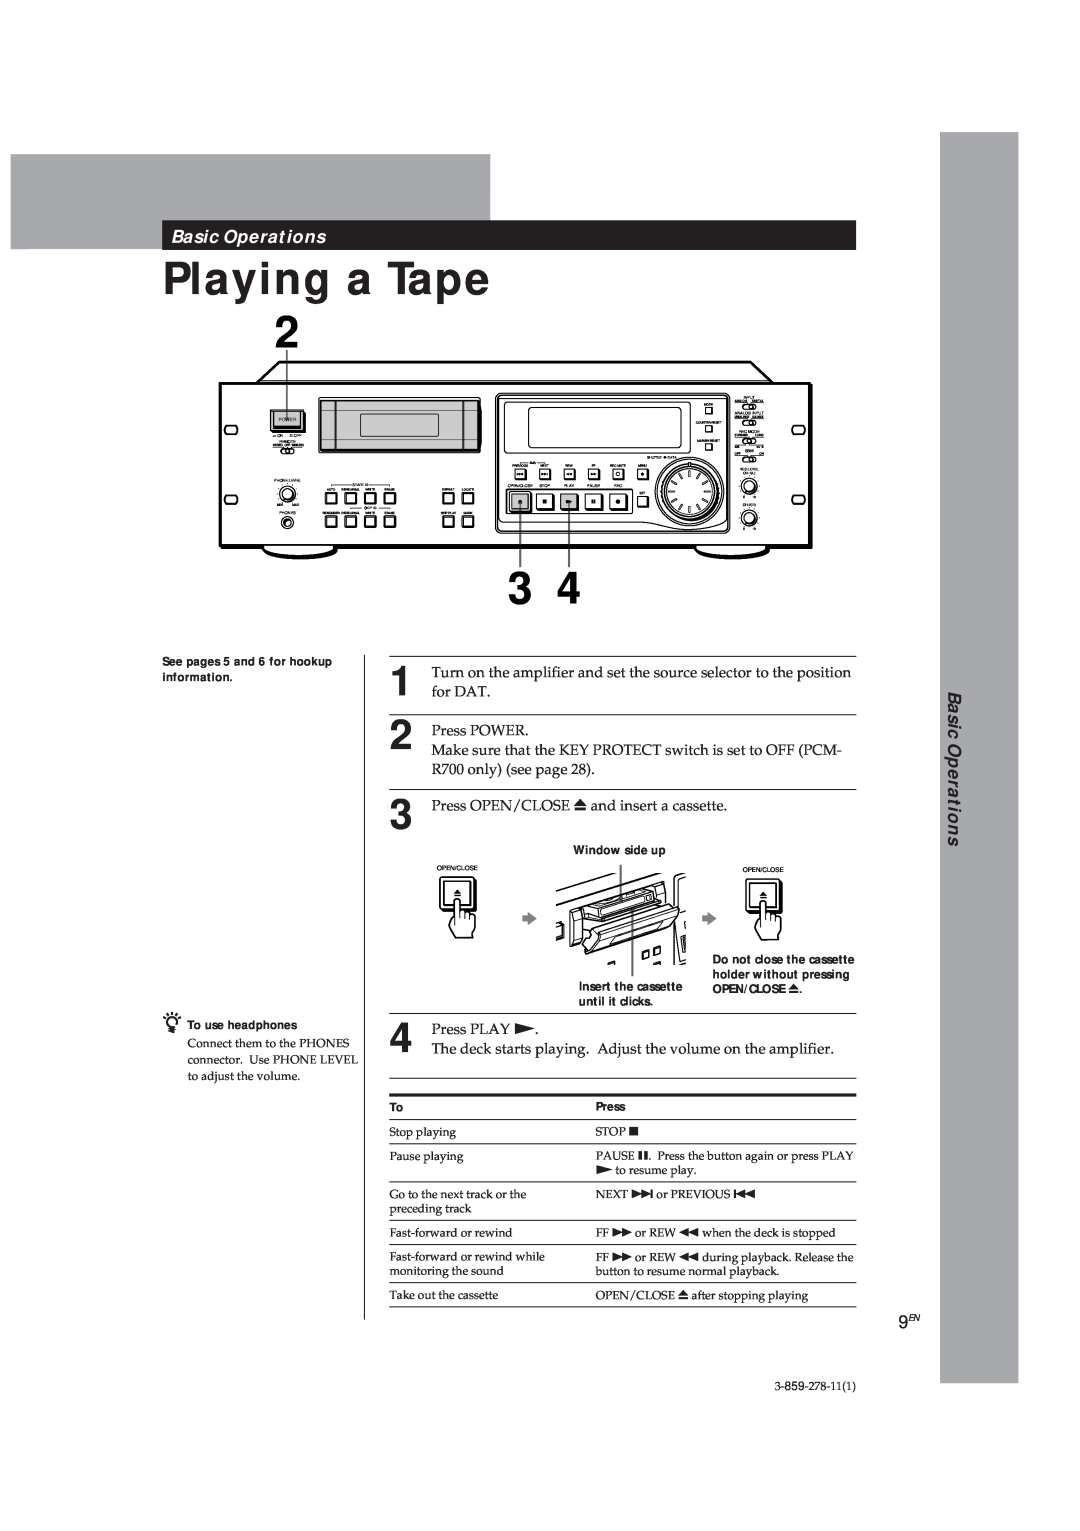 Sony PCM-R700 manual Playing a Tape, Basic Operations, See pages 5 and 6 for hookup information, zTo use headphones, Press 